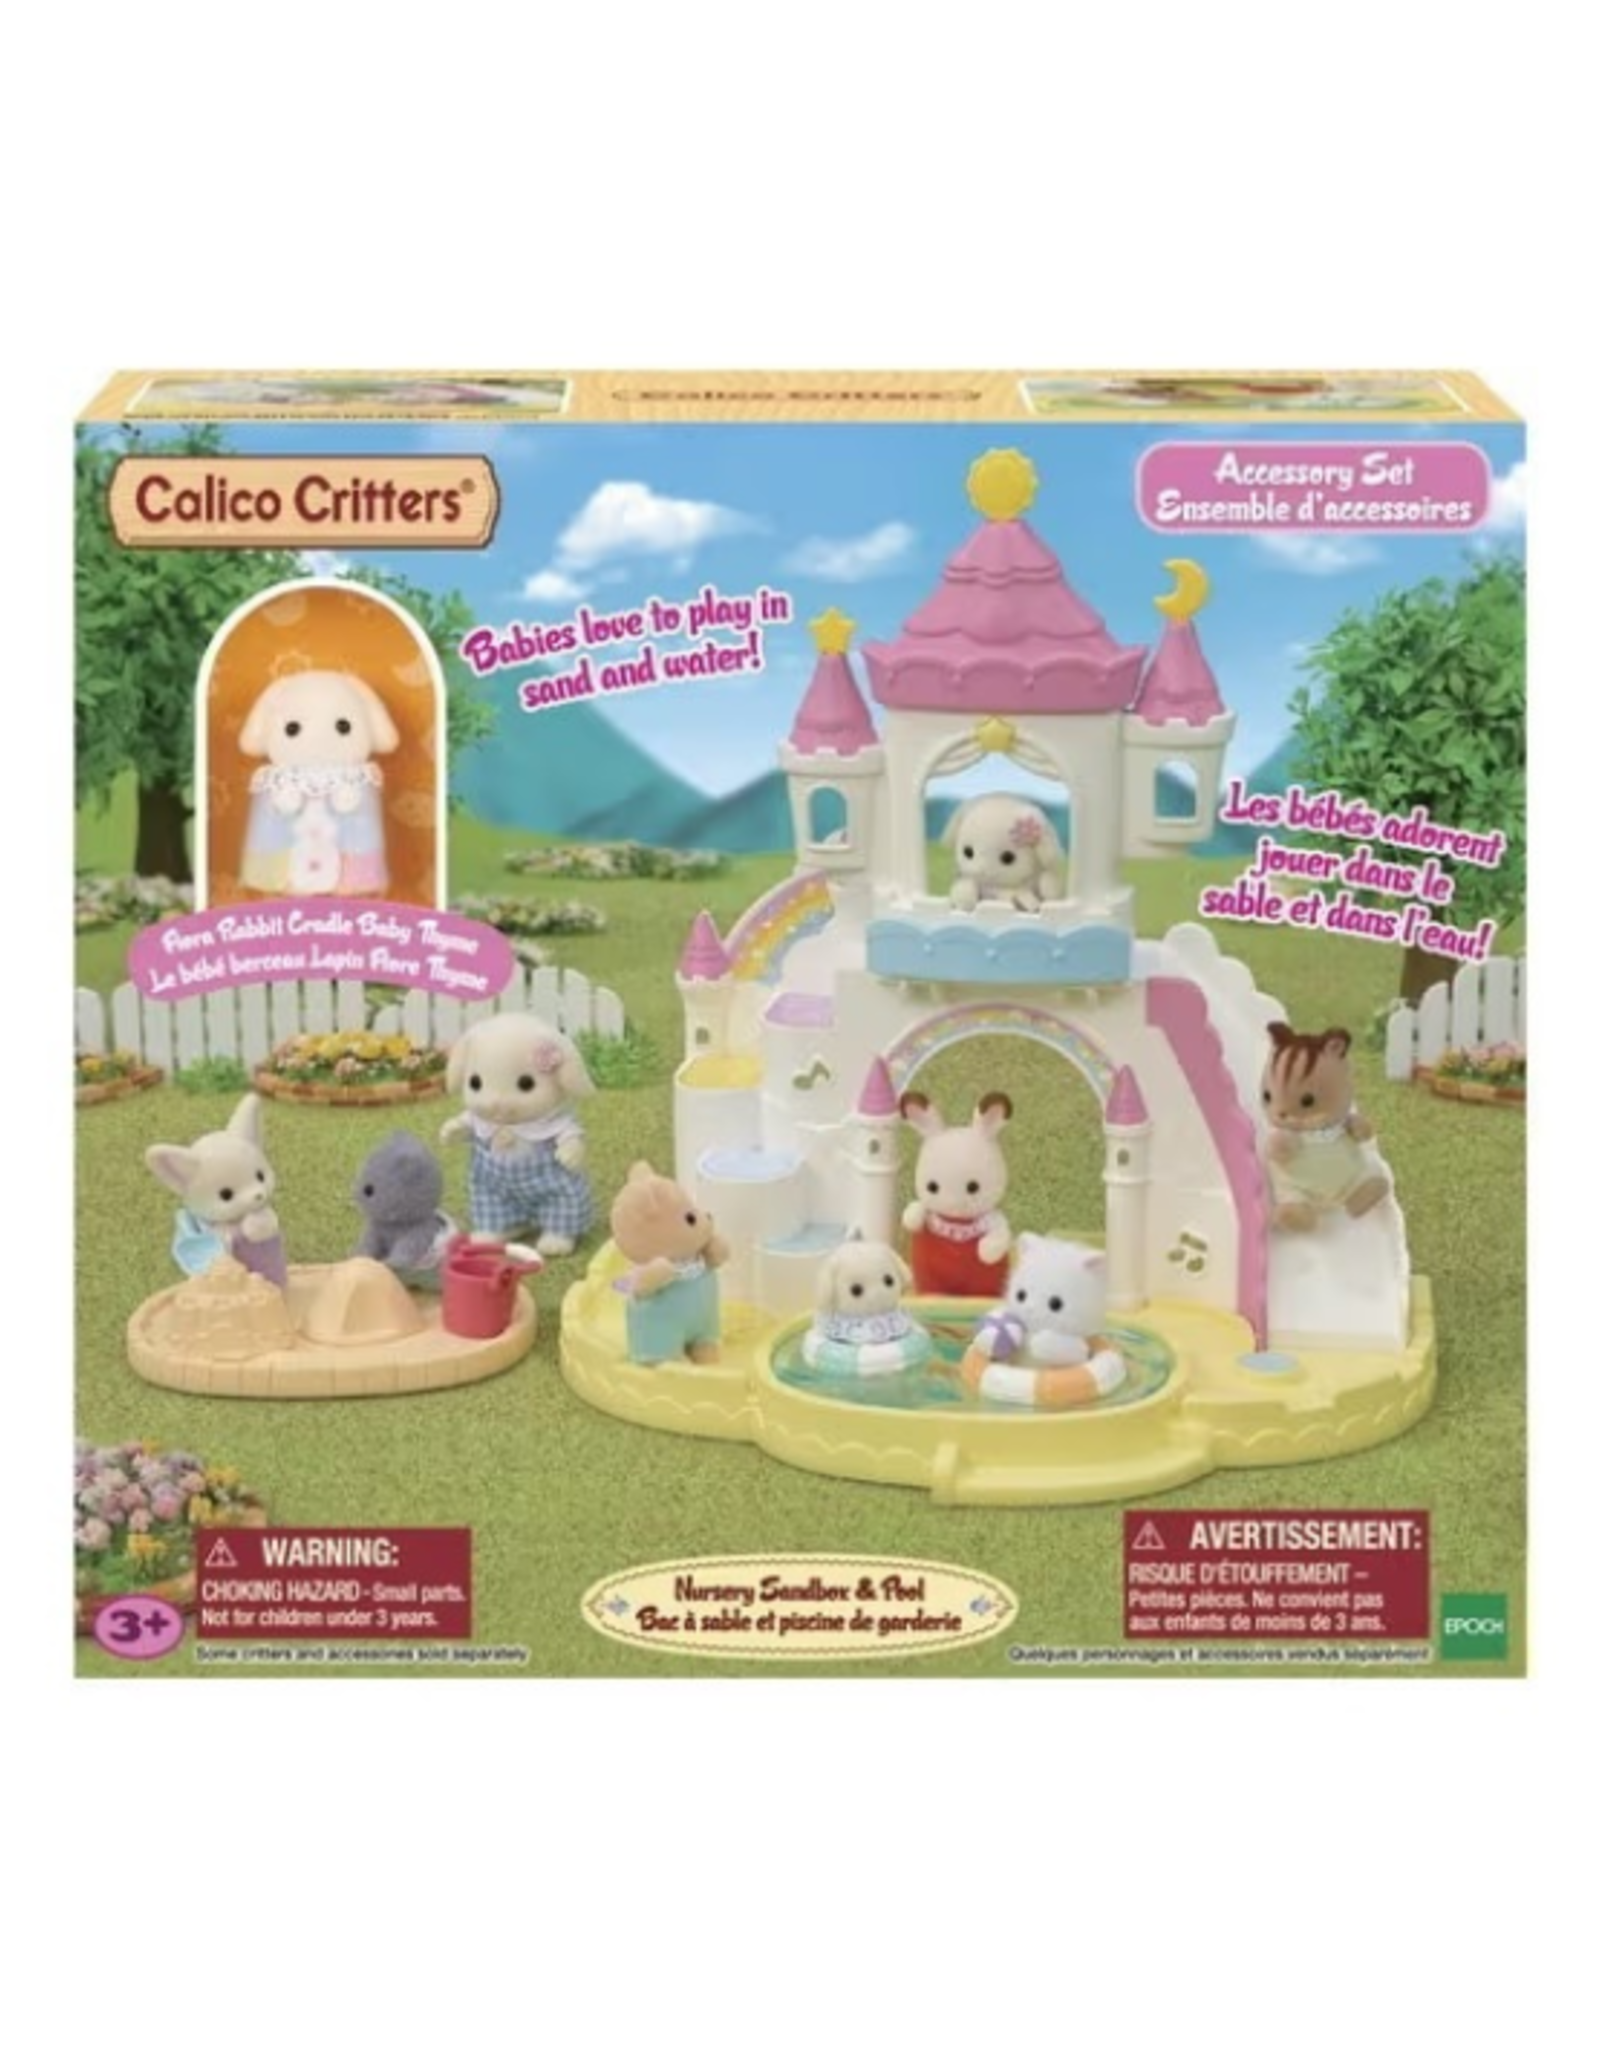 Calico Critters Calico Critters - Nursery Sandbox and Pool